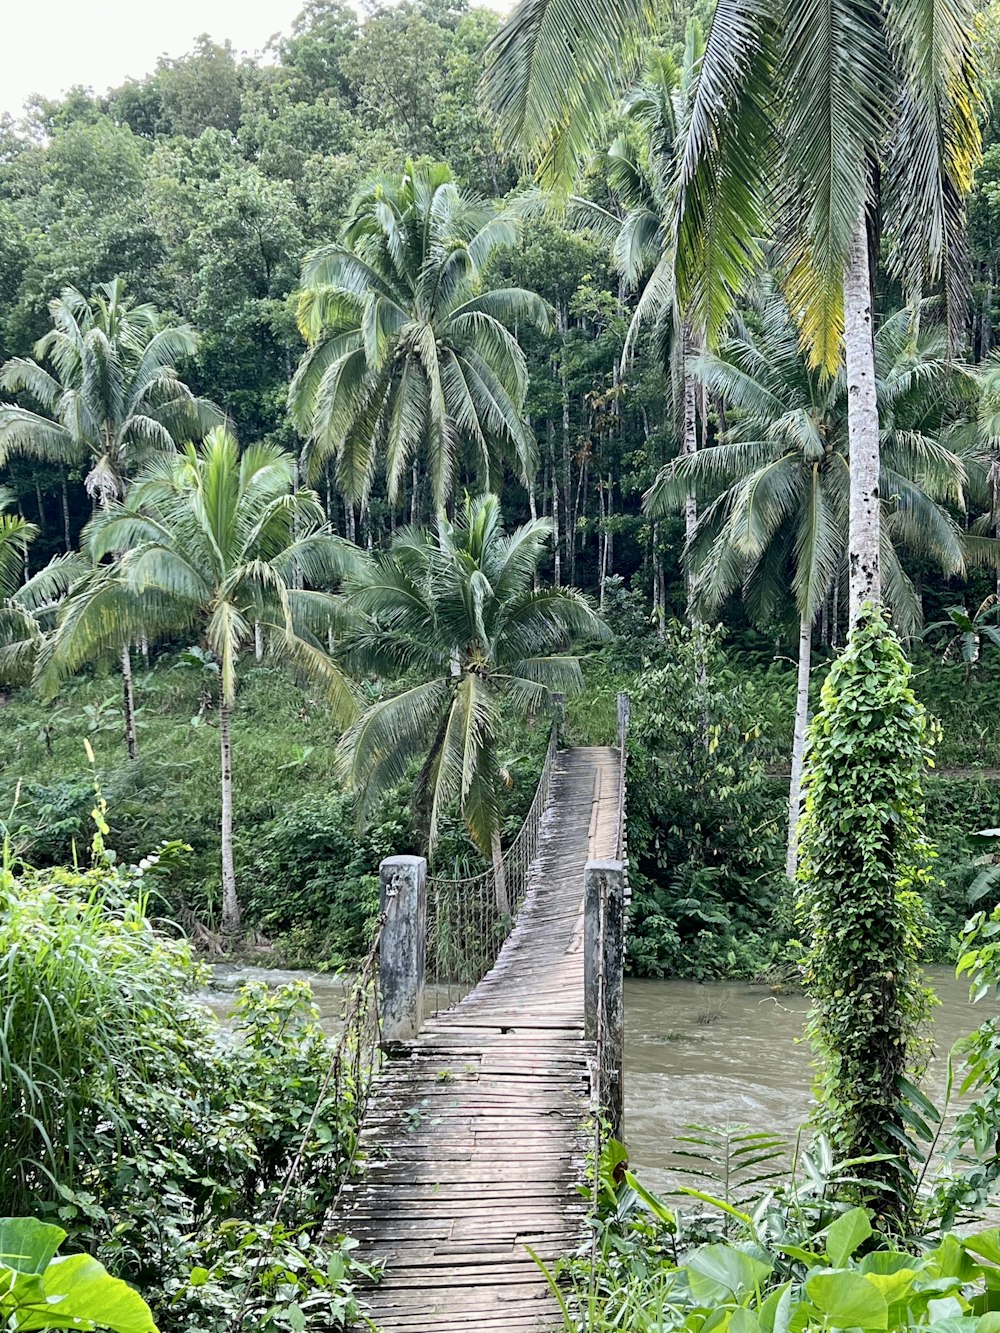 a wooden bridge over a river surrounded by palm trees